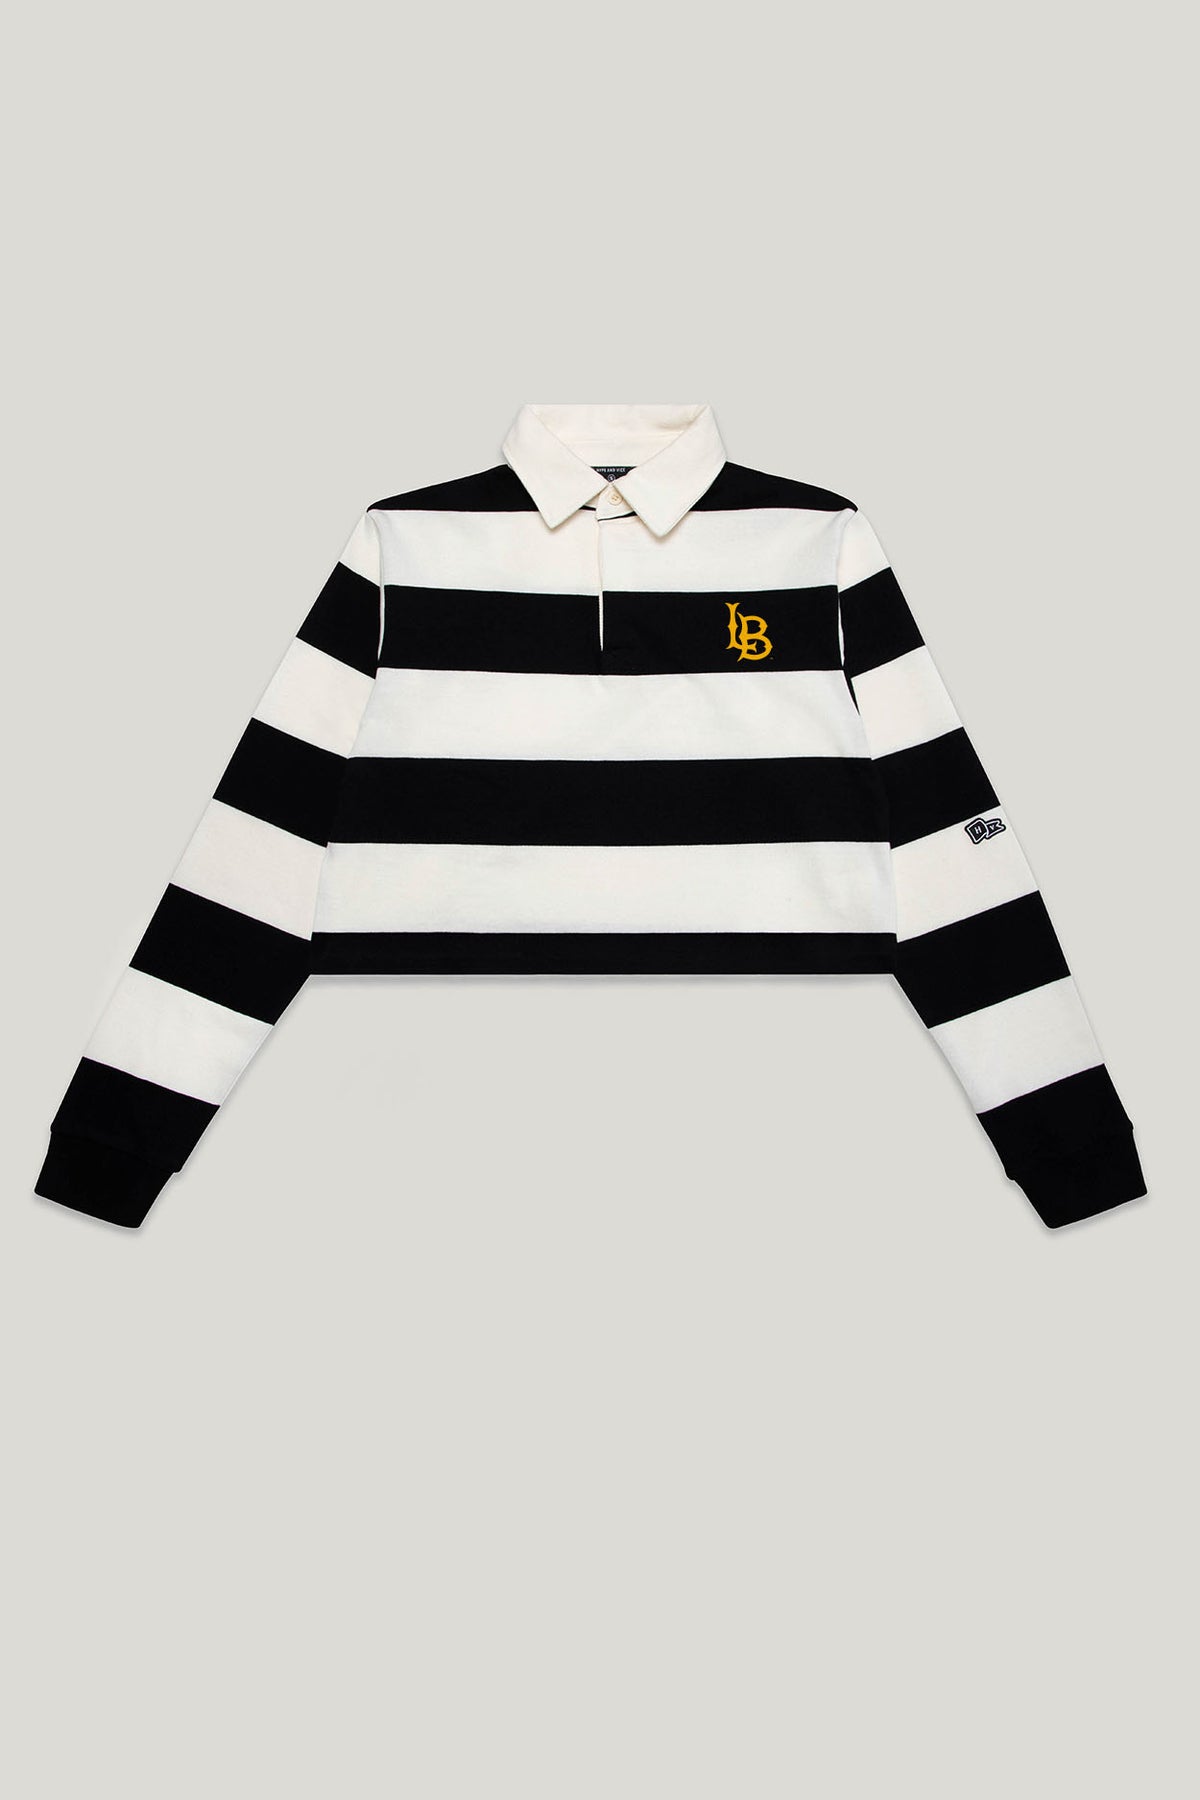 Cal State Long Beach Rugby Top